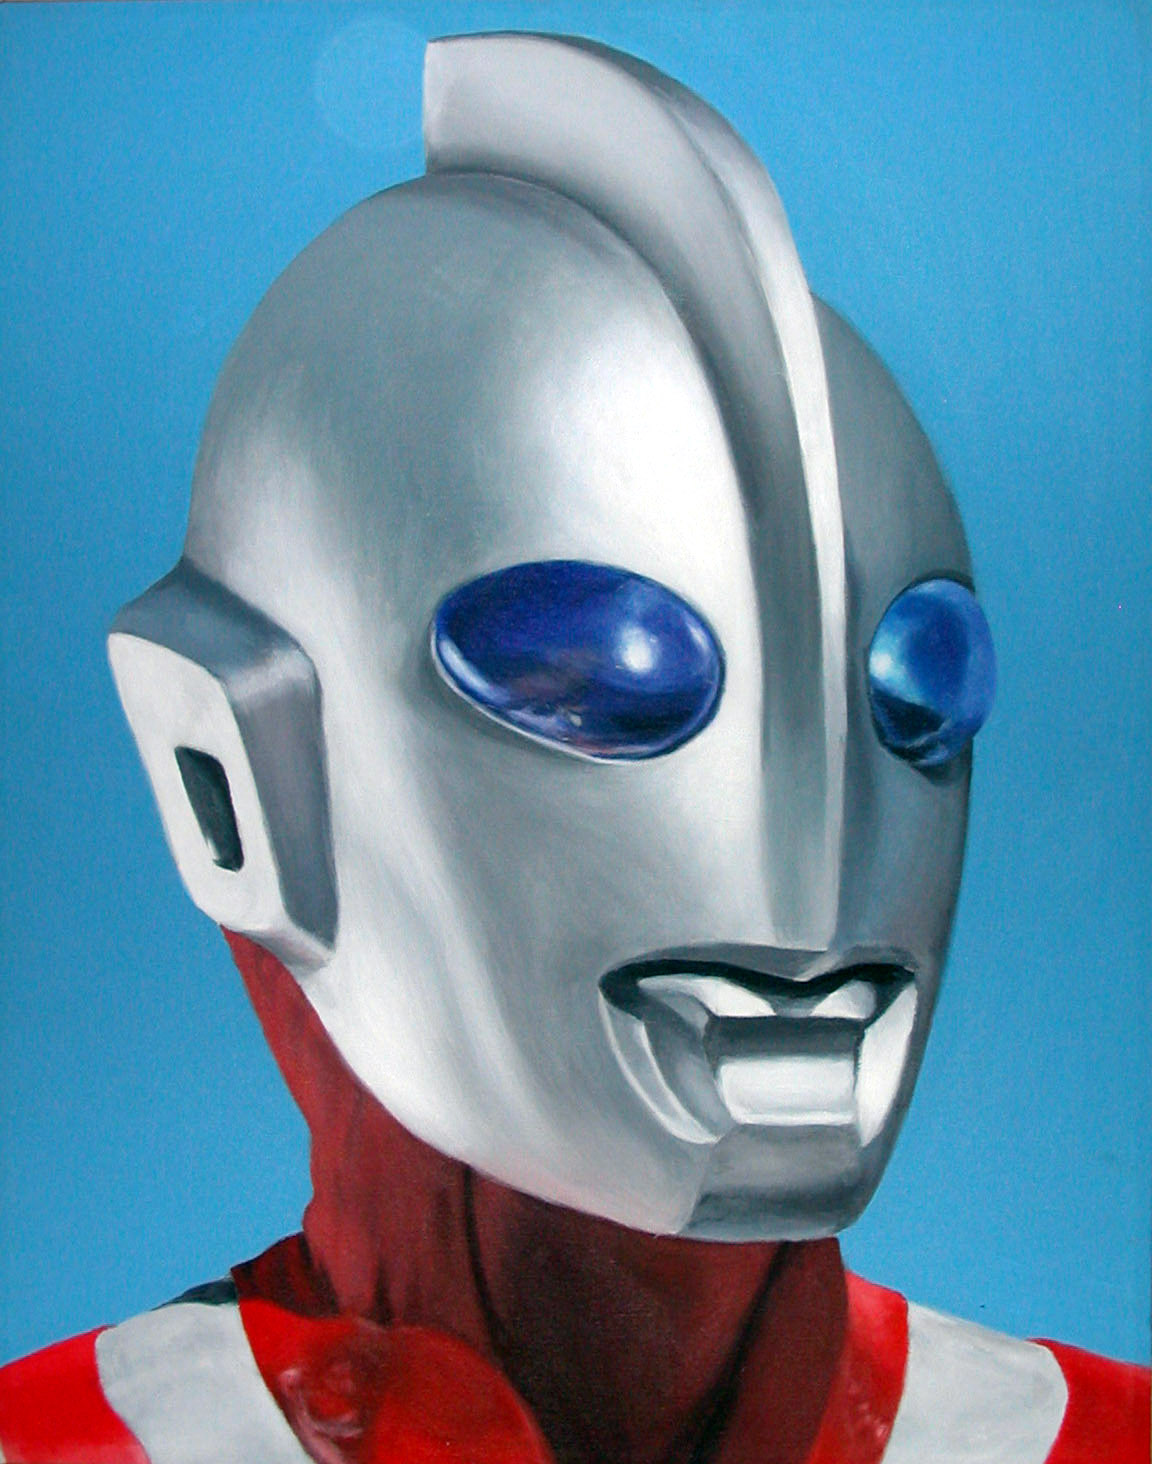 From the series Ultraman Encyclopedia by Ichiro Irie (2002-2004). Acrylic on canvas. 22 x 28 inches. Photo courtesy of artist.